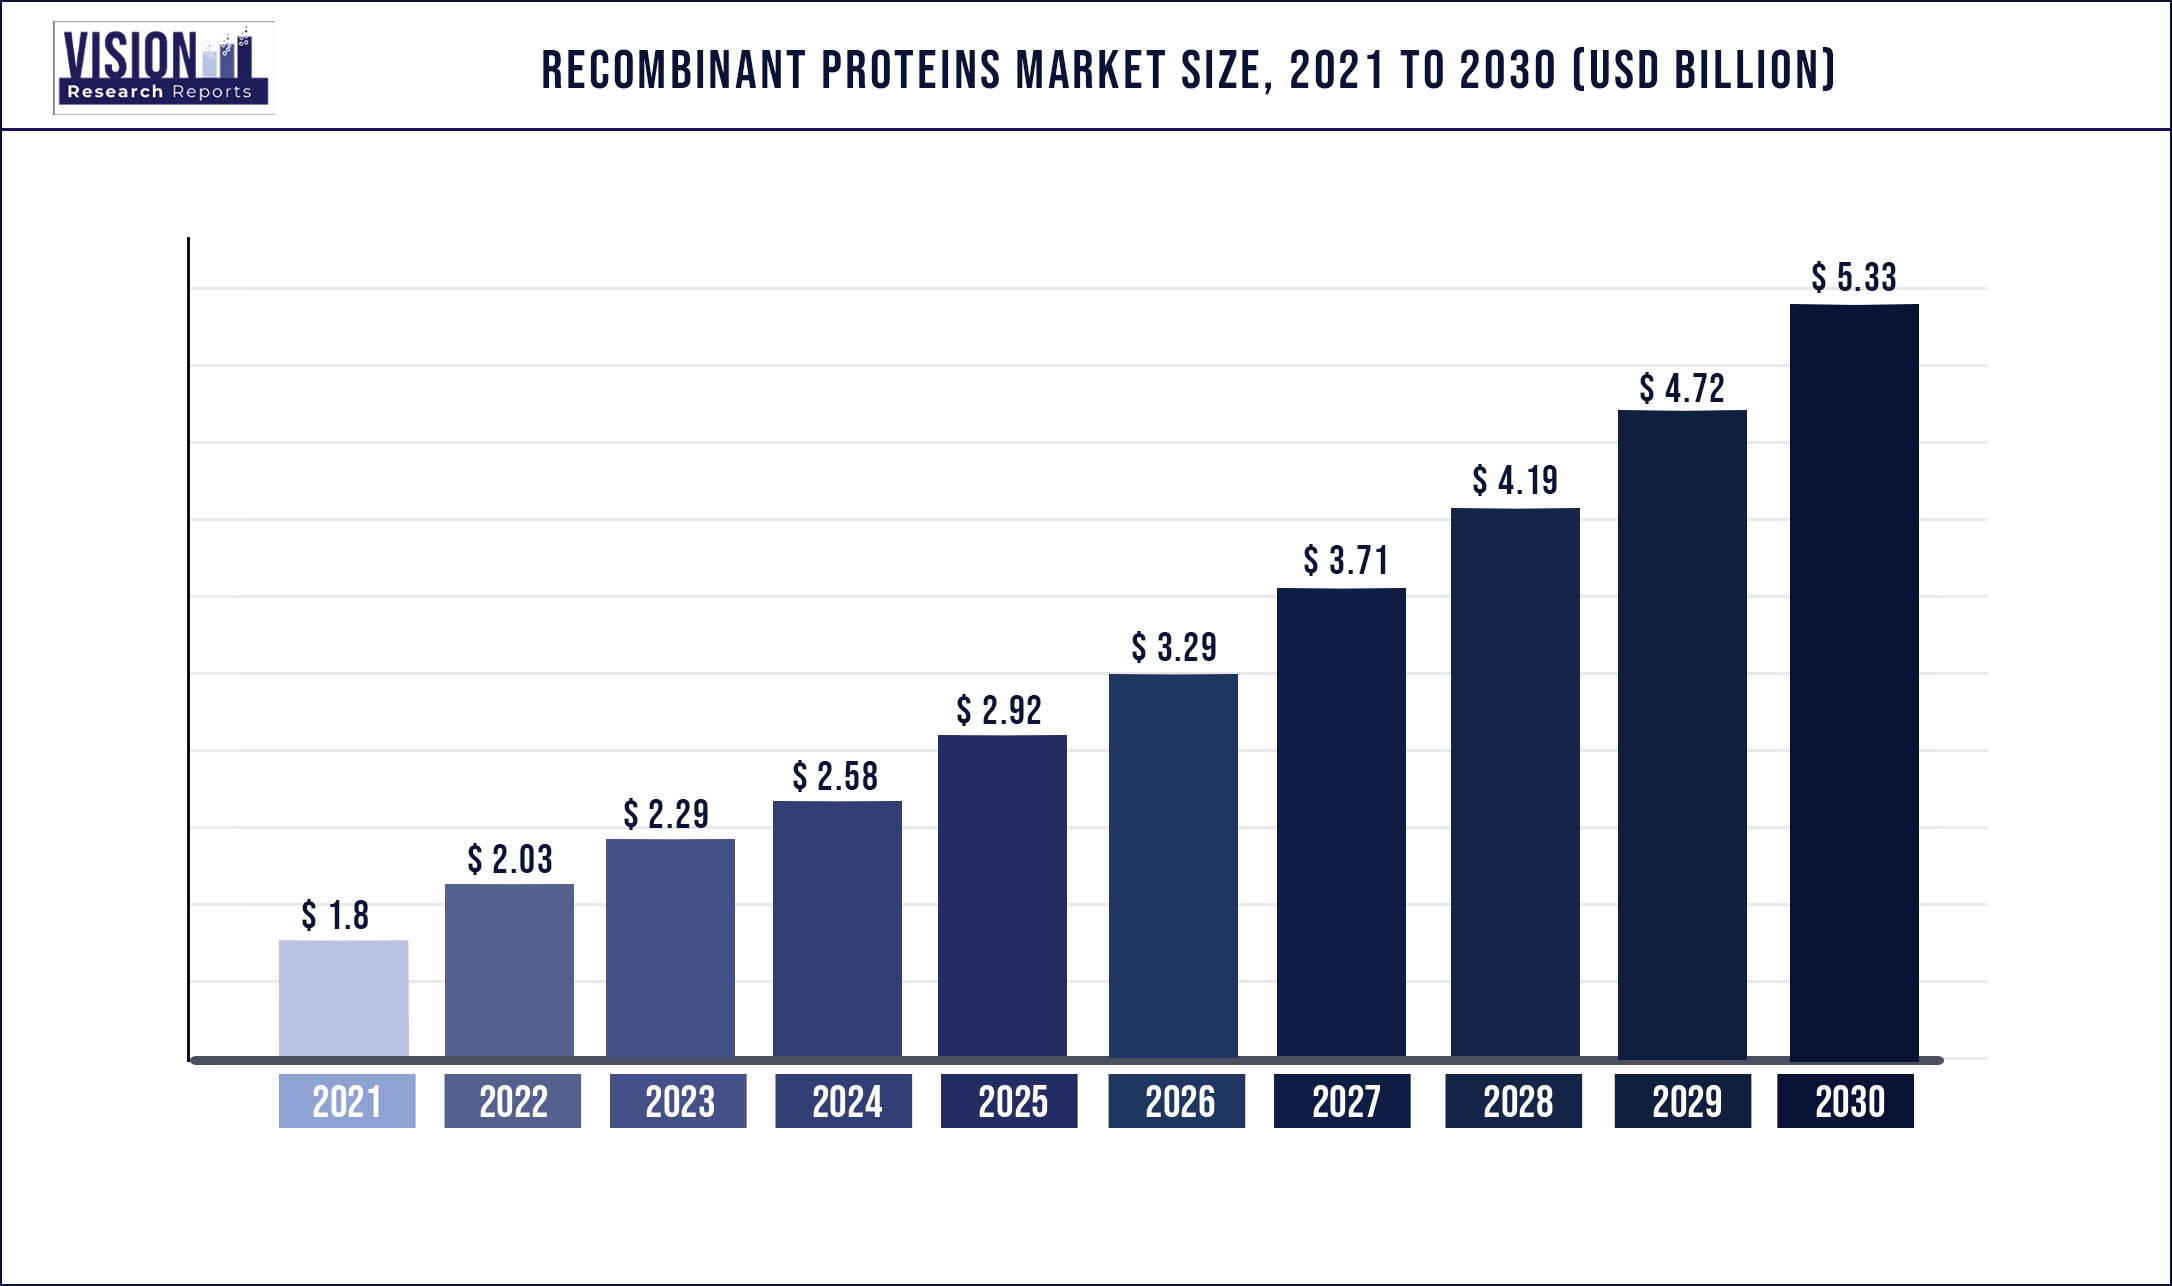 Recombinant Proteins Market Size 2021 to 2030